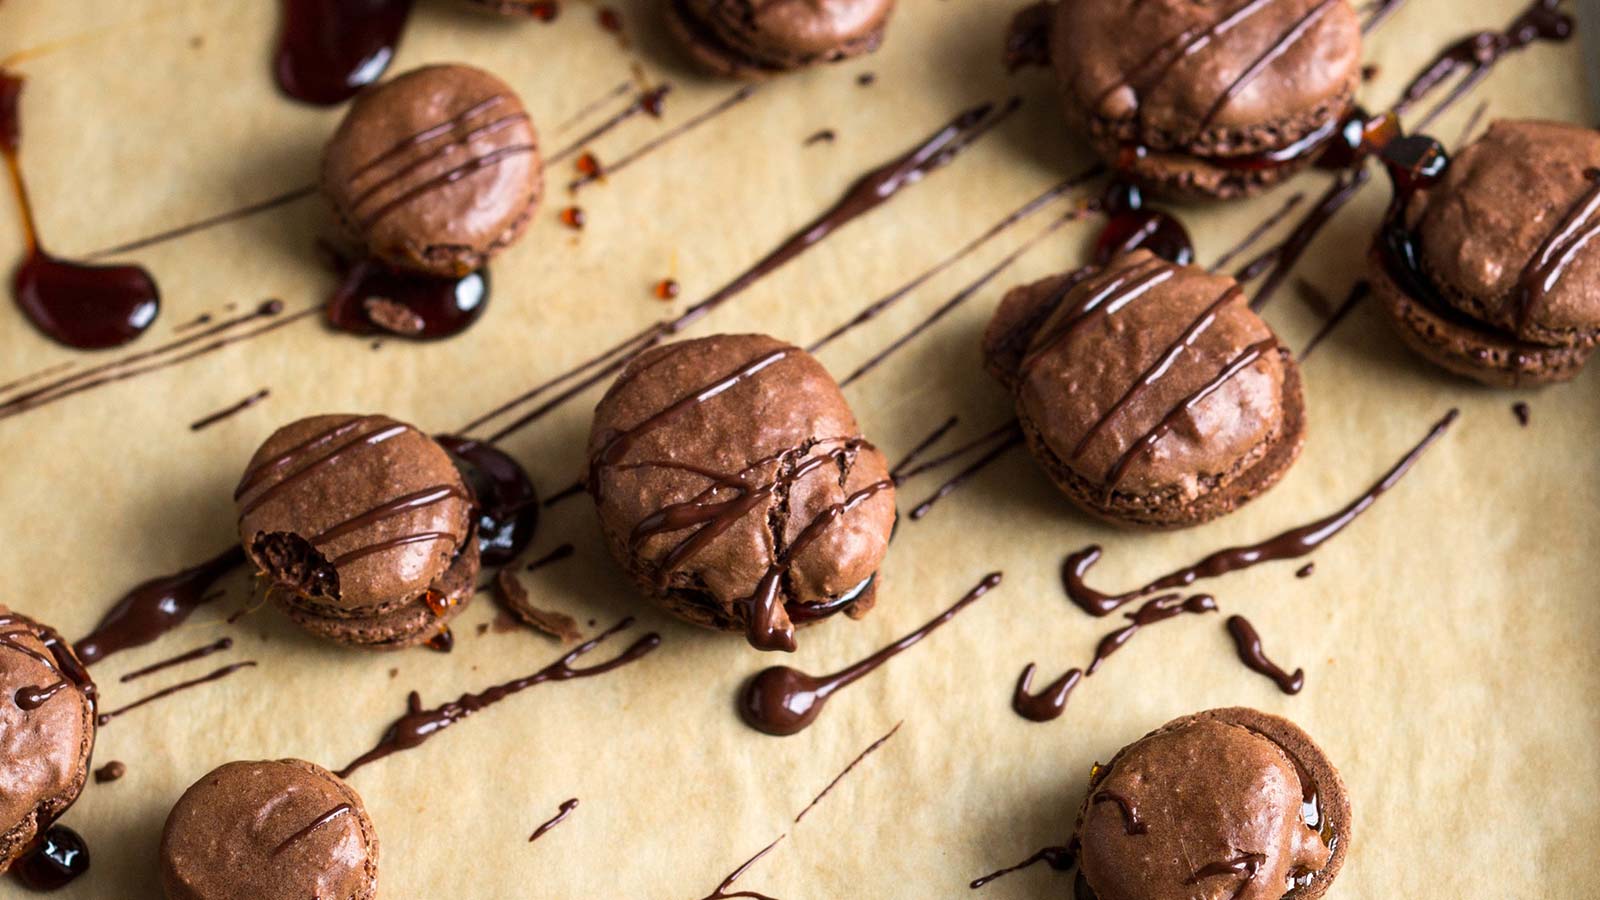 🍫 We Know Whether You’re an Introvert, Extrovert, Or Ambivert Based on How You Rate These Chocolate Desserts Chocolate macarons